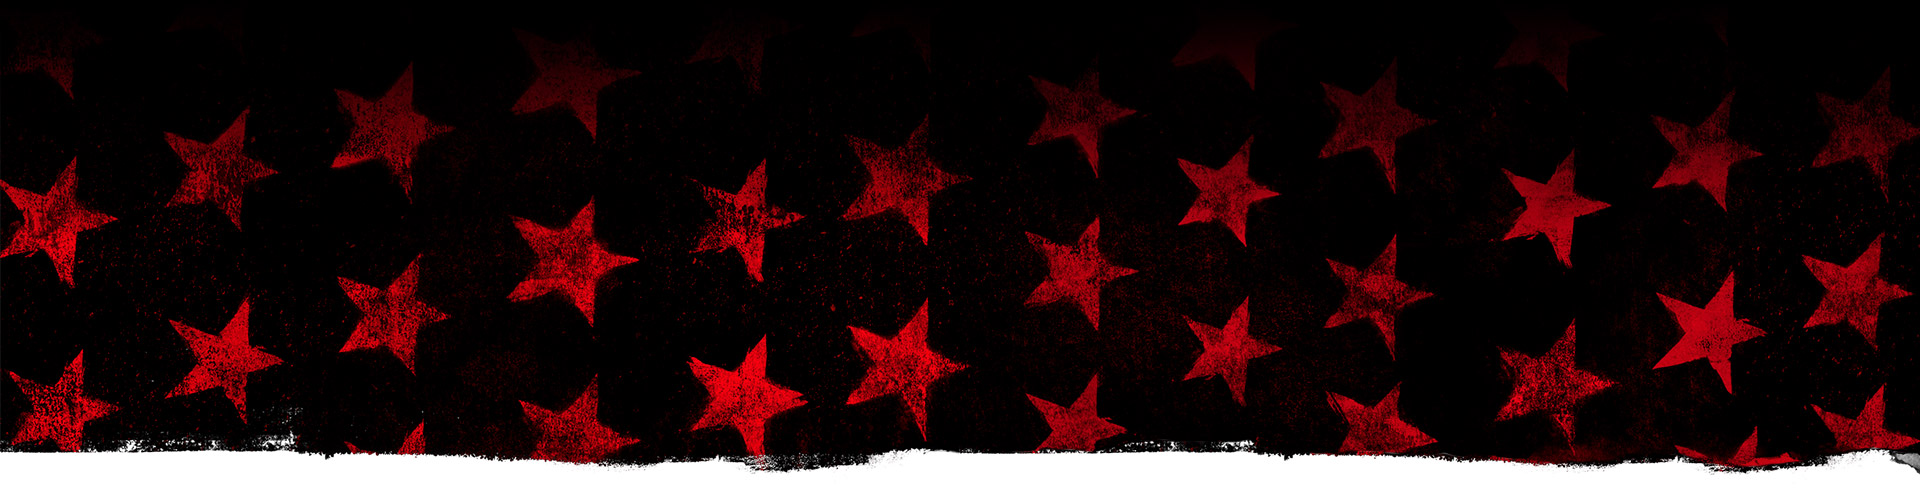 Red stars against a black background.